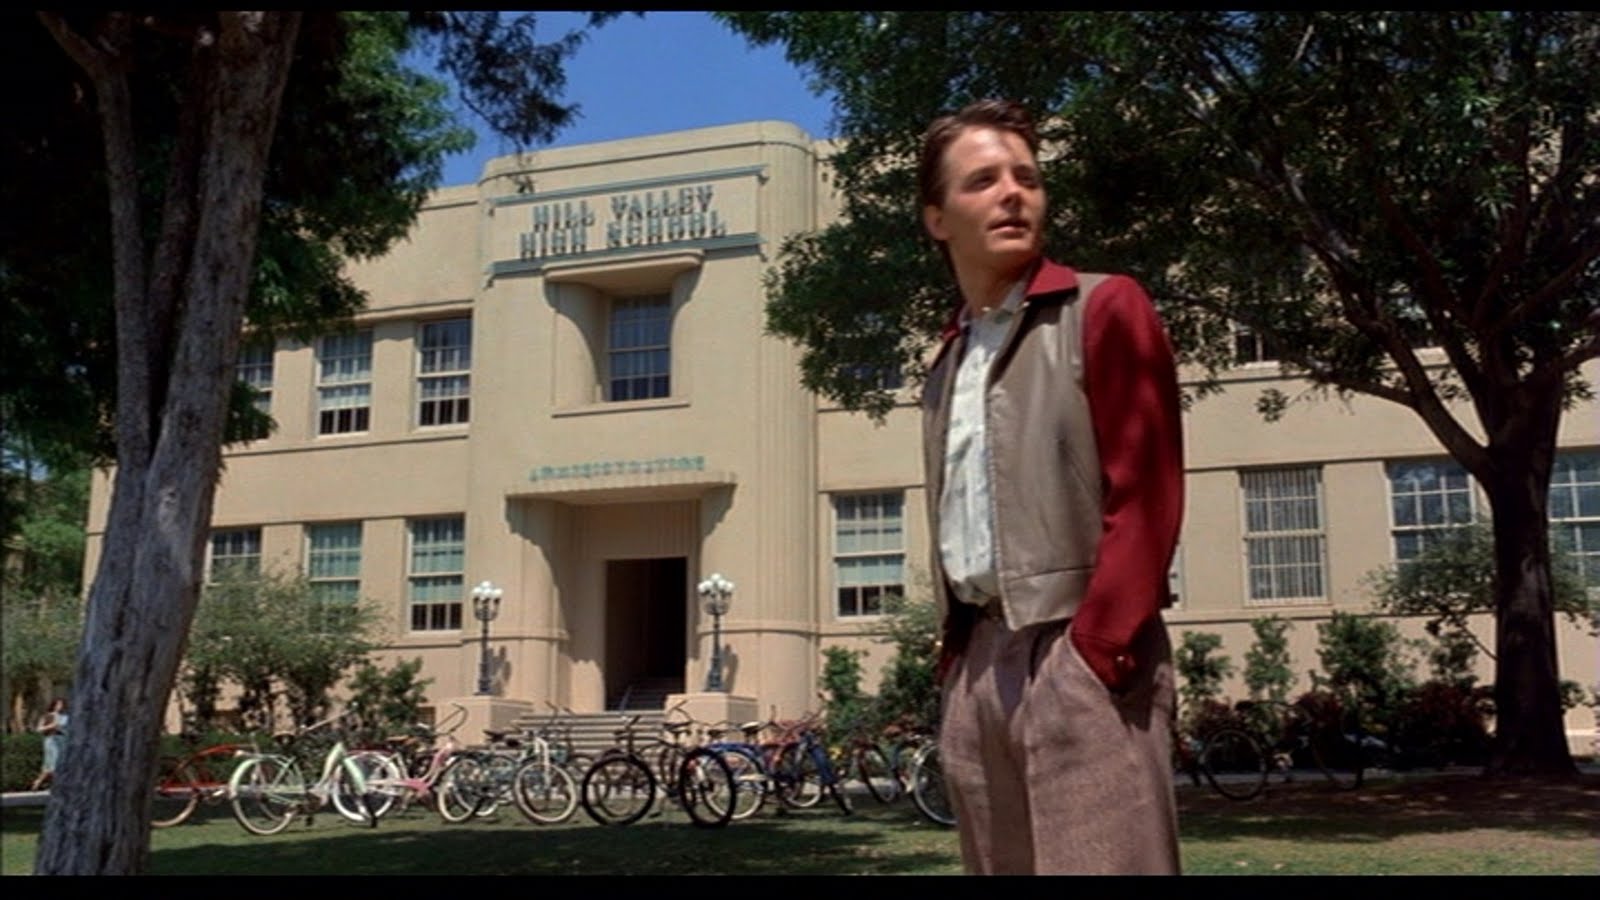 back-to-the-future-filming-locations-marty-high-school-1955